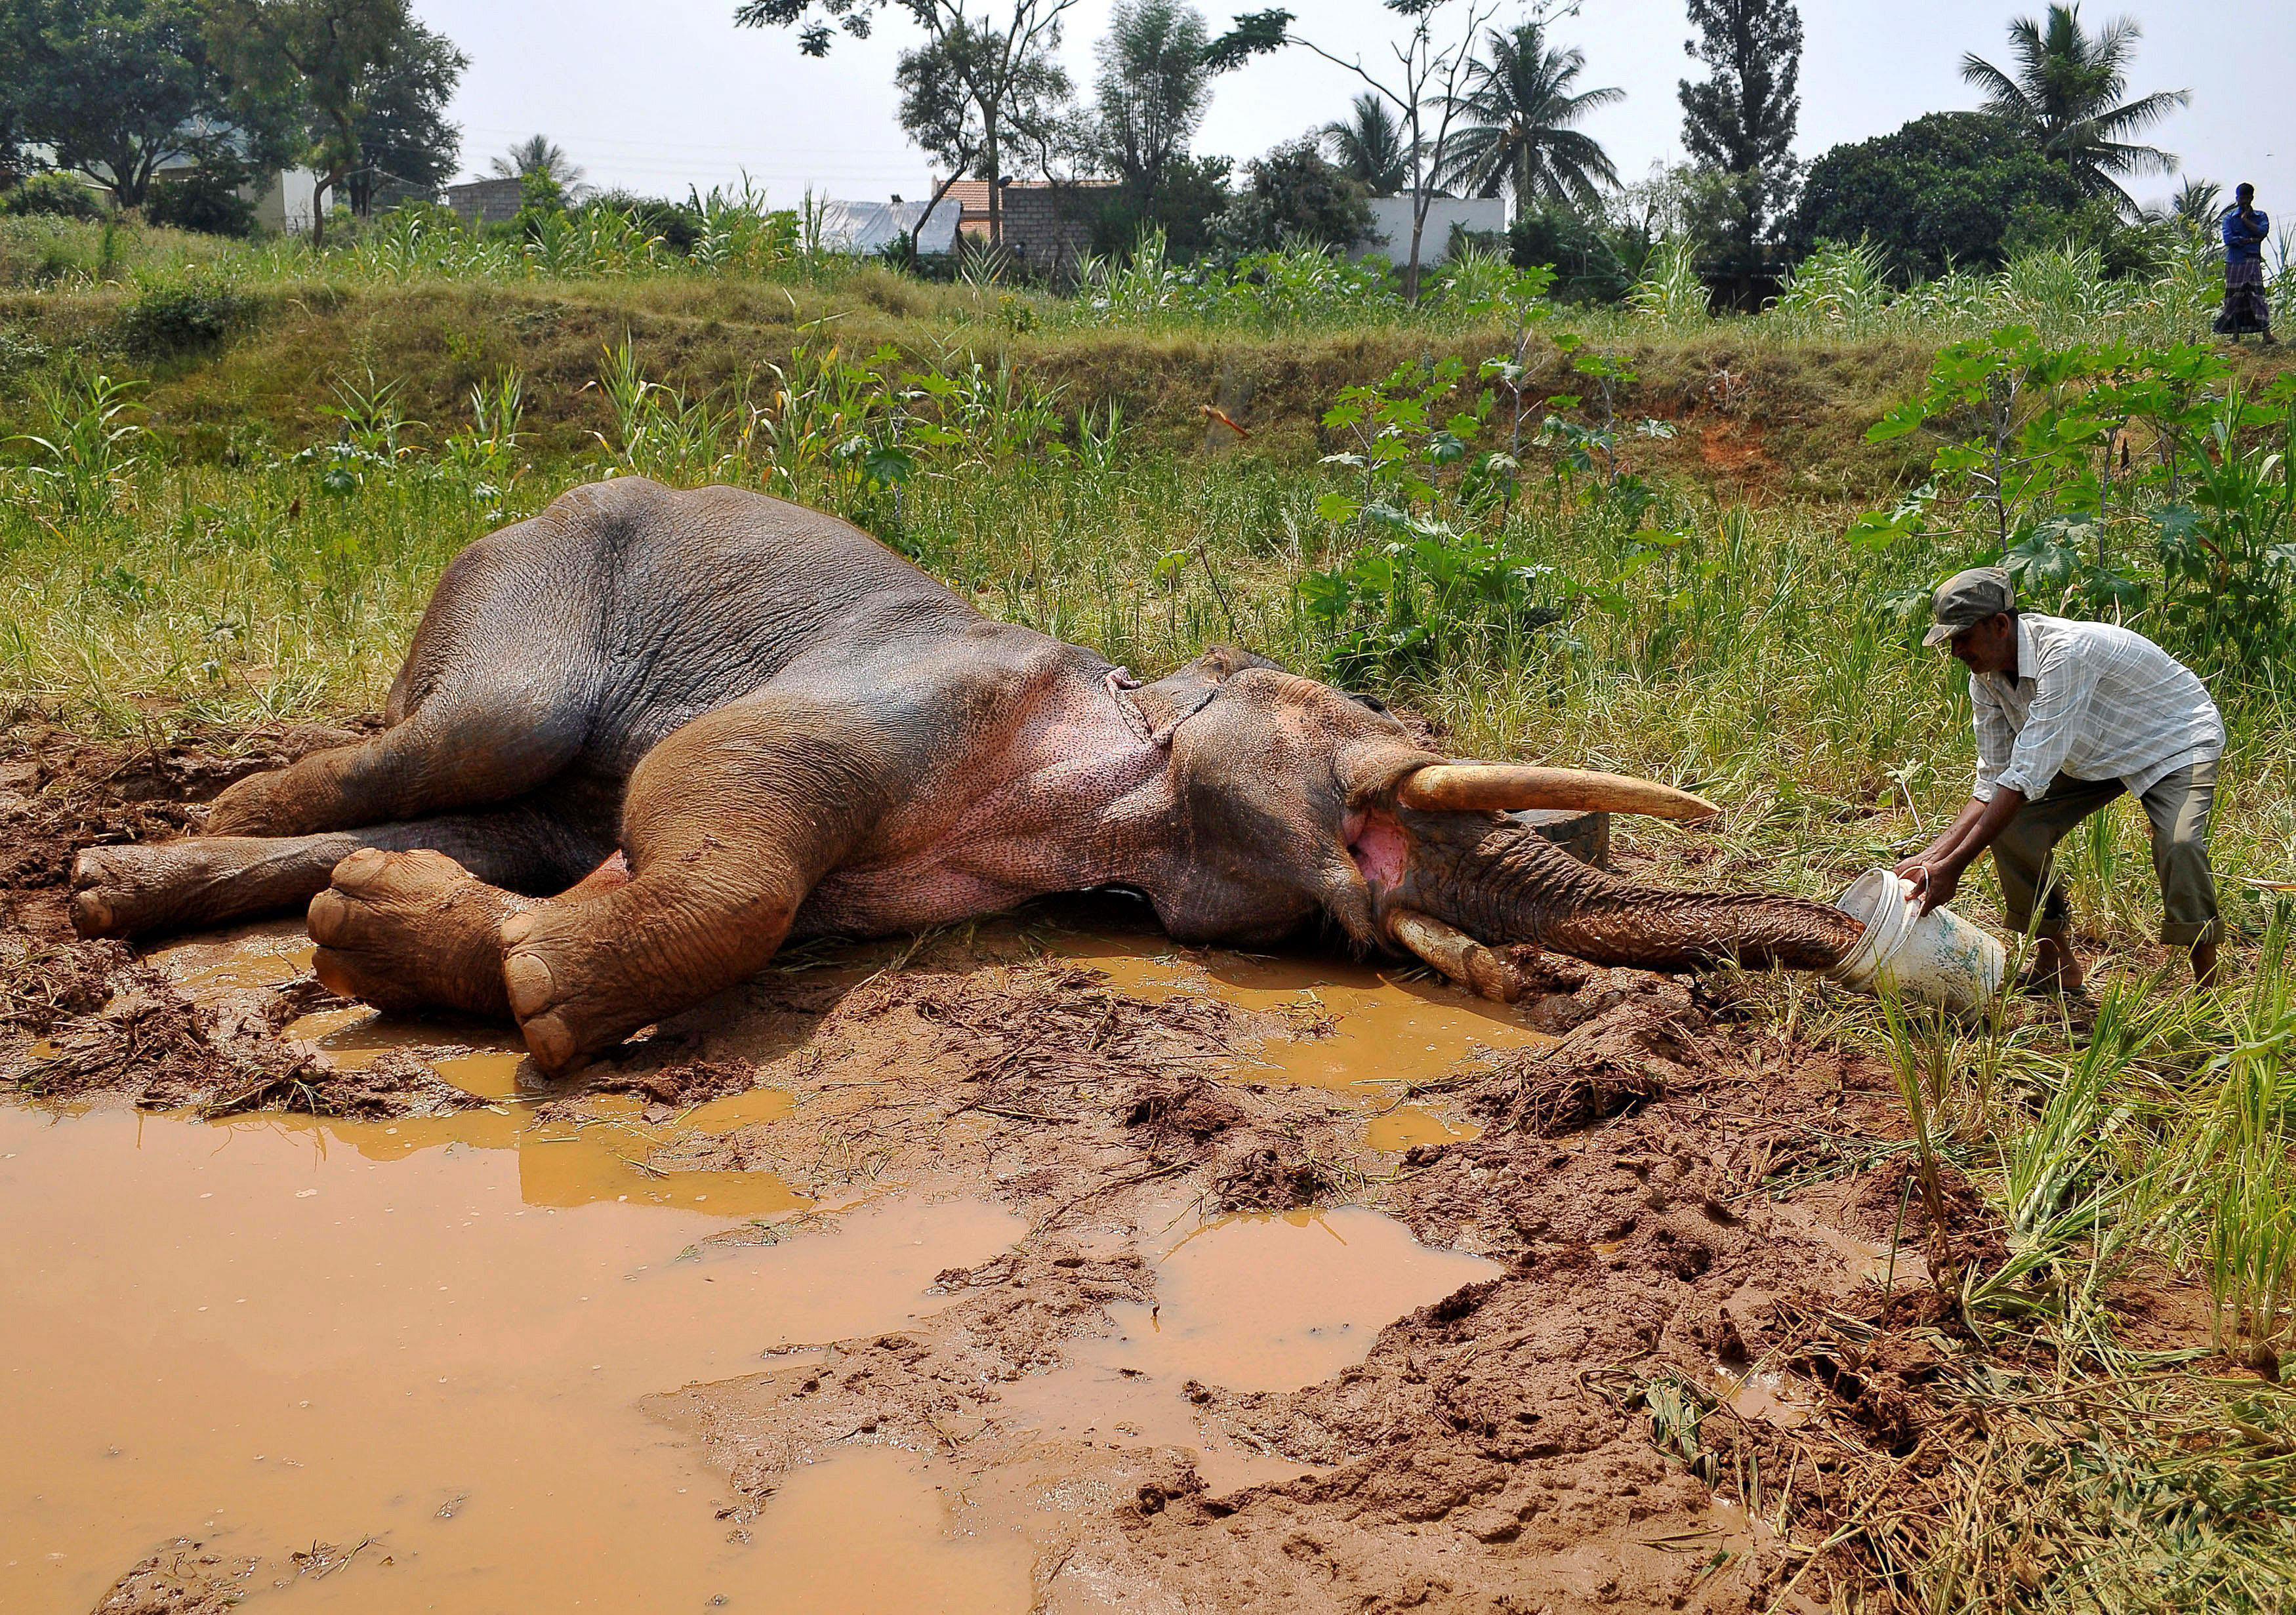 A forest guard provides water to an injured Asiatic elephant as it lies in a field in Avverahalli vi